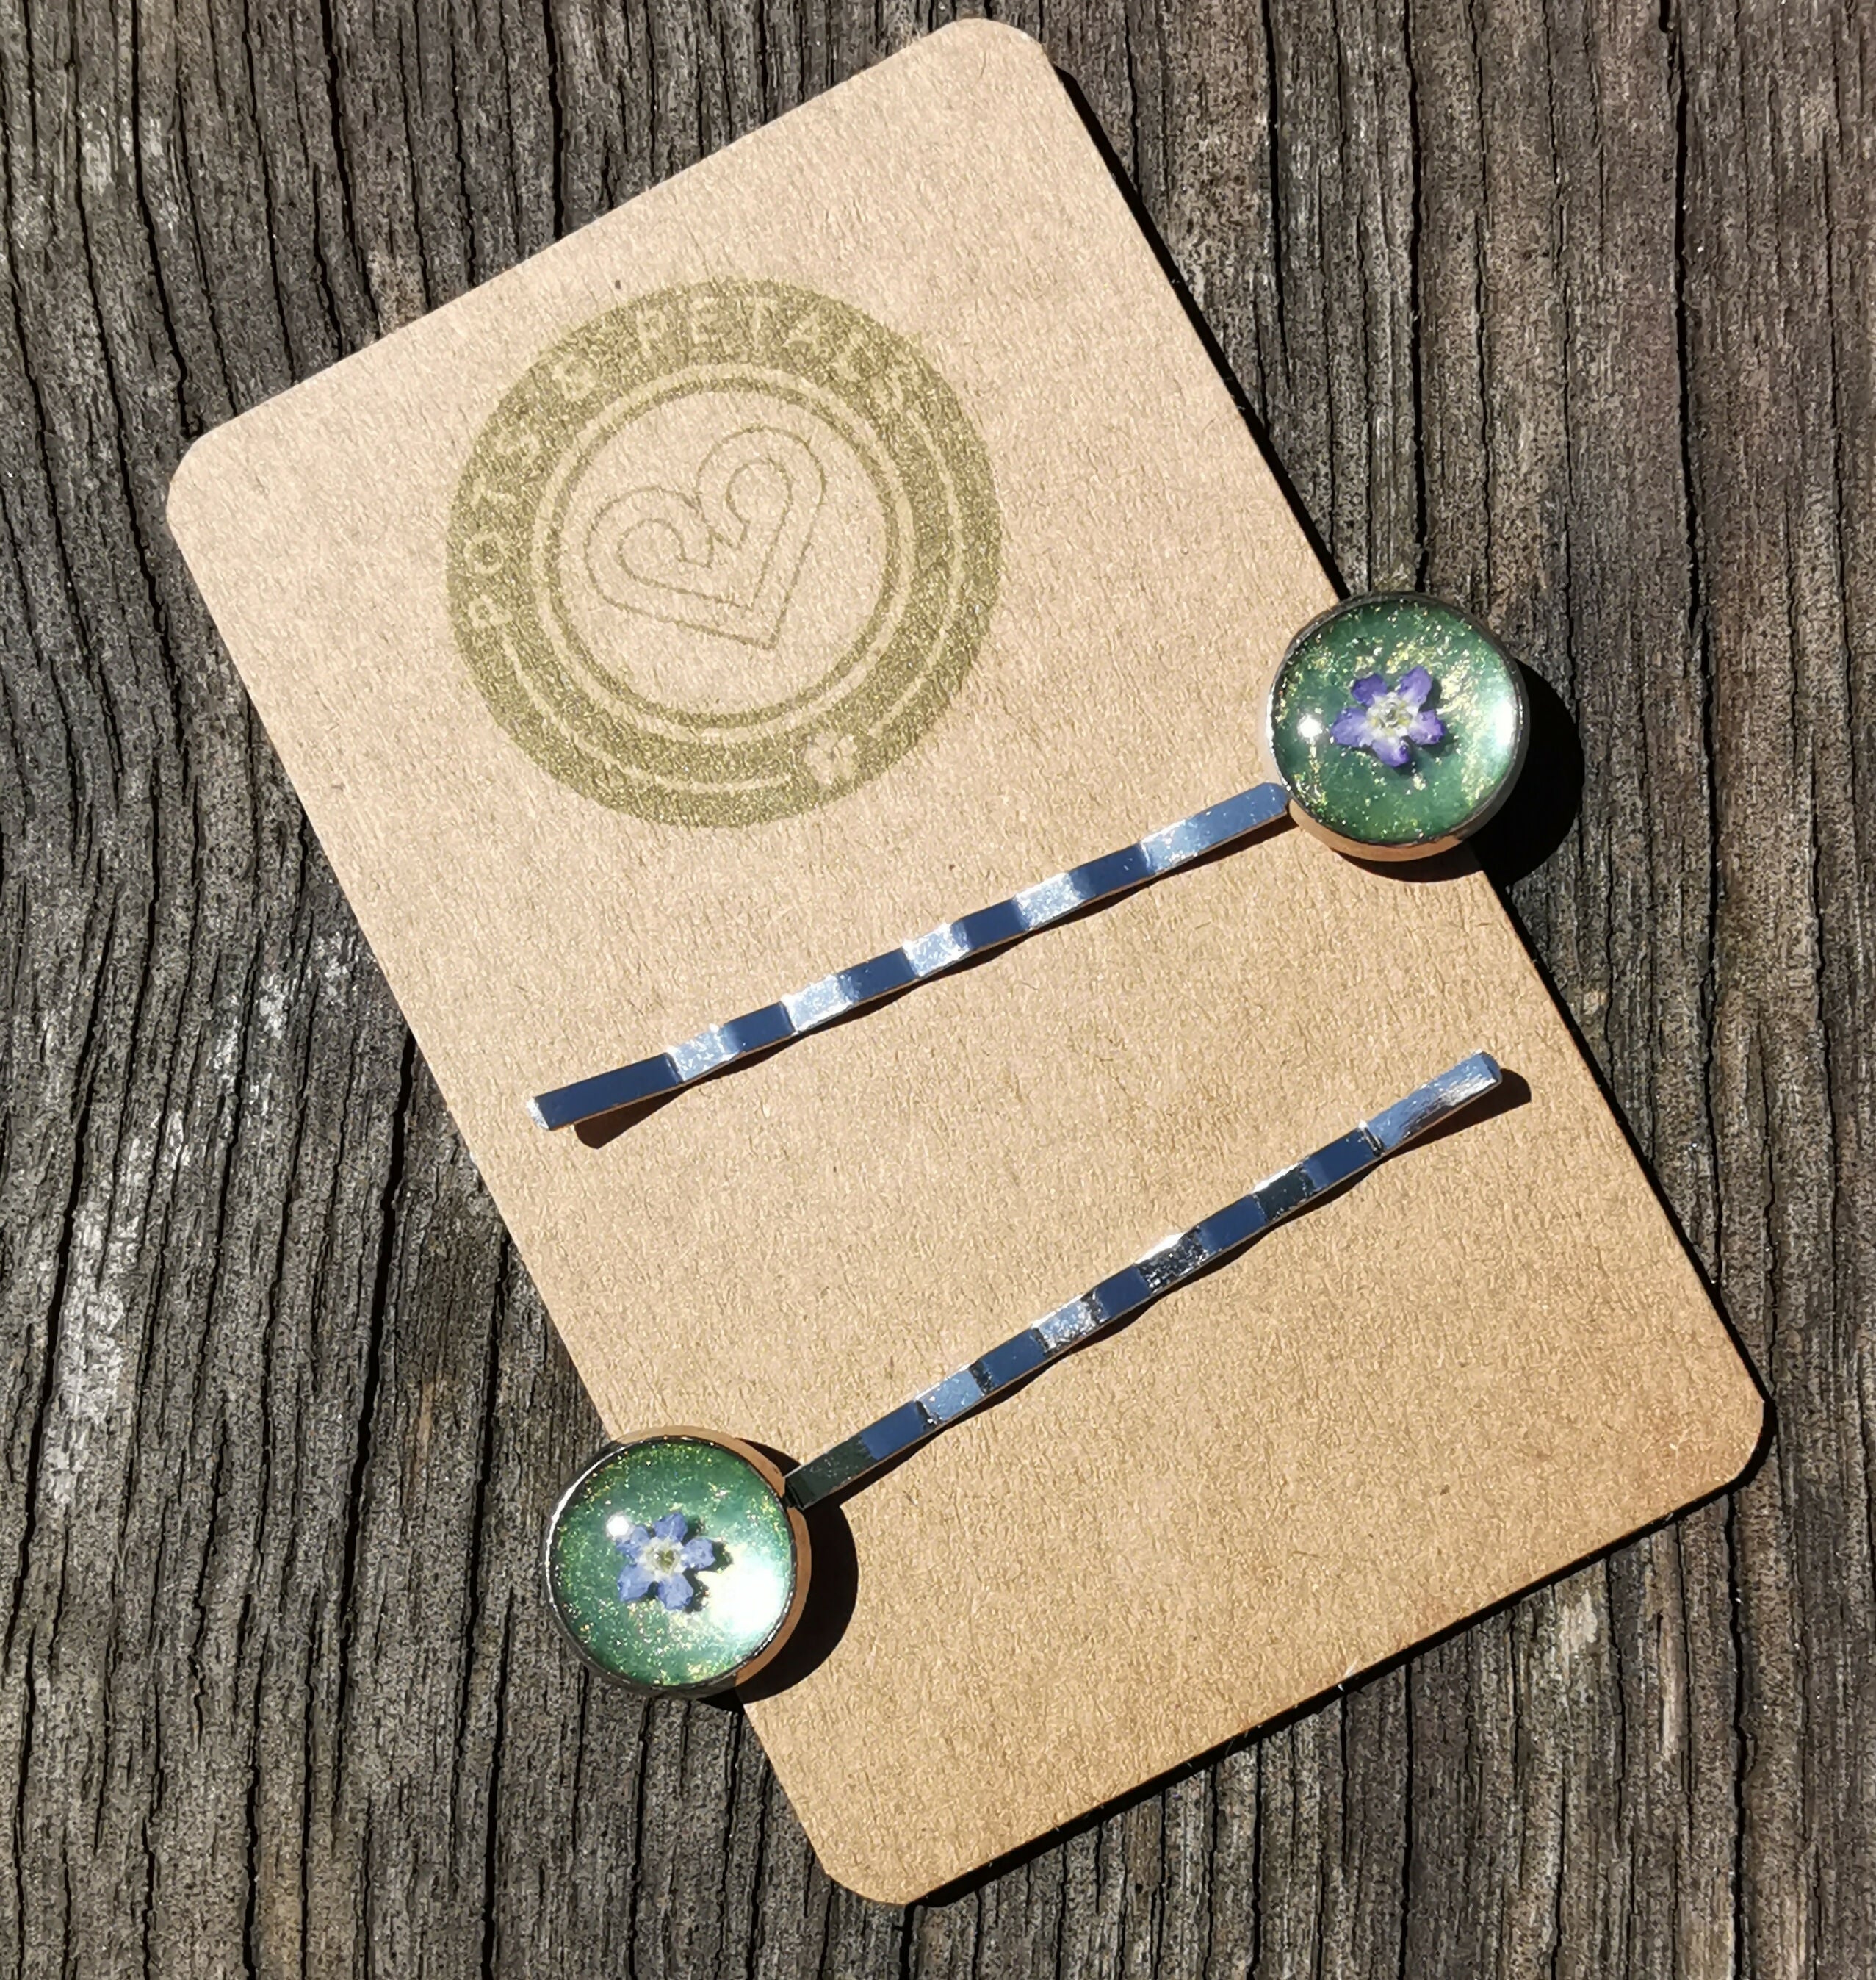 Pressed forget me not hairslides